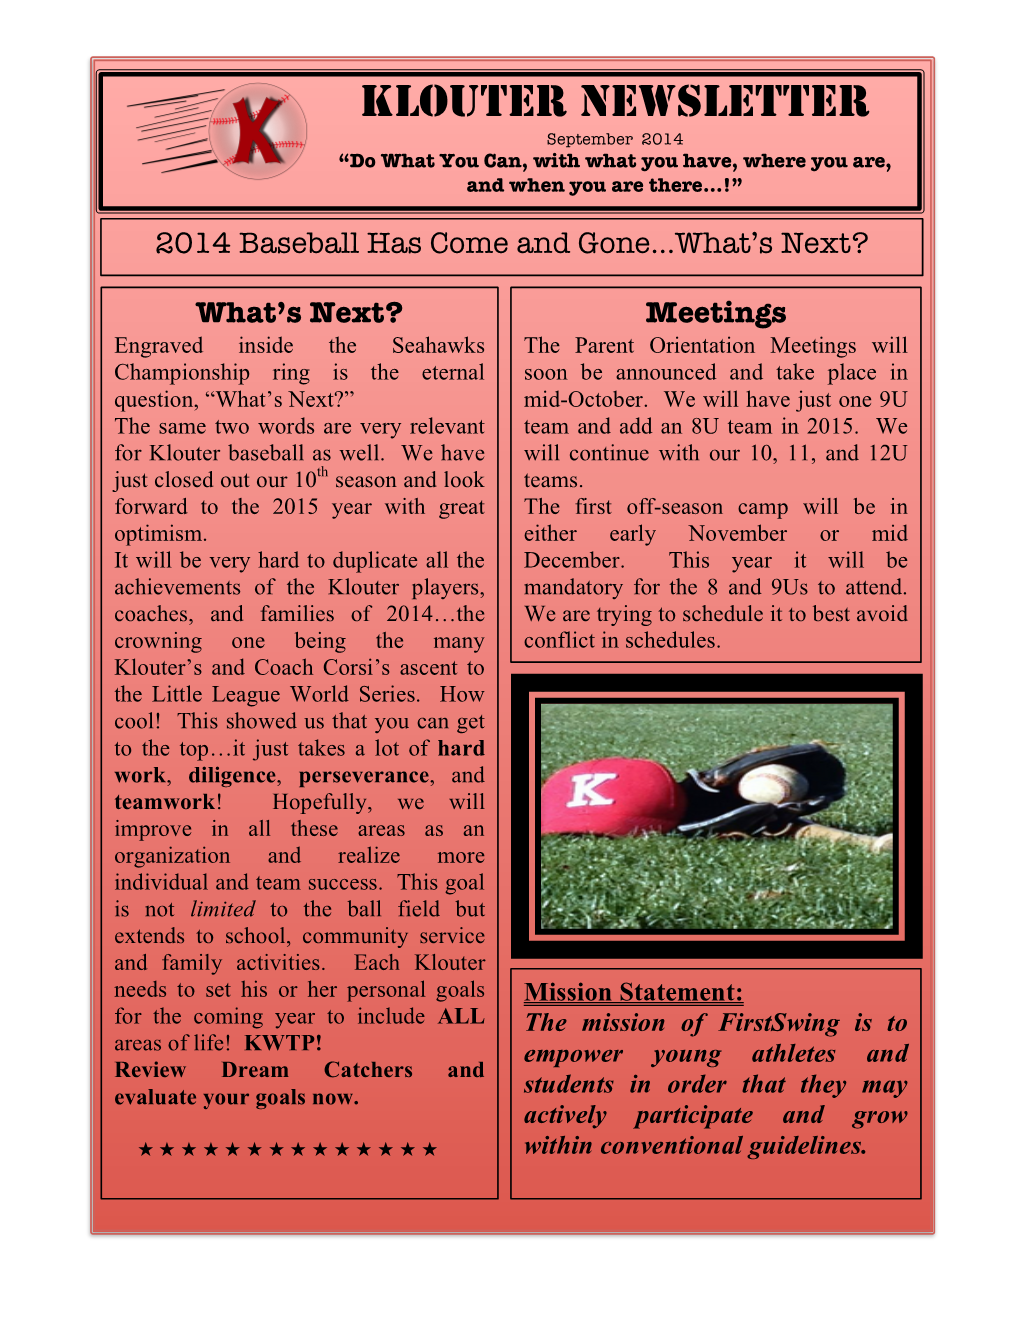 KLOUTER NEWSLETTER September 2014 “Do What You Can, with What You Have, Where You Are, and When You Are There…!”